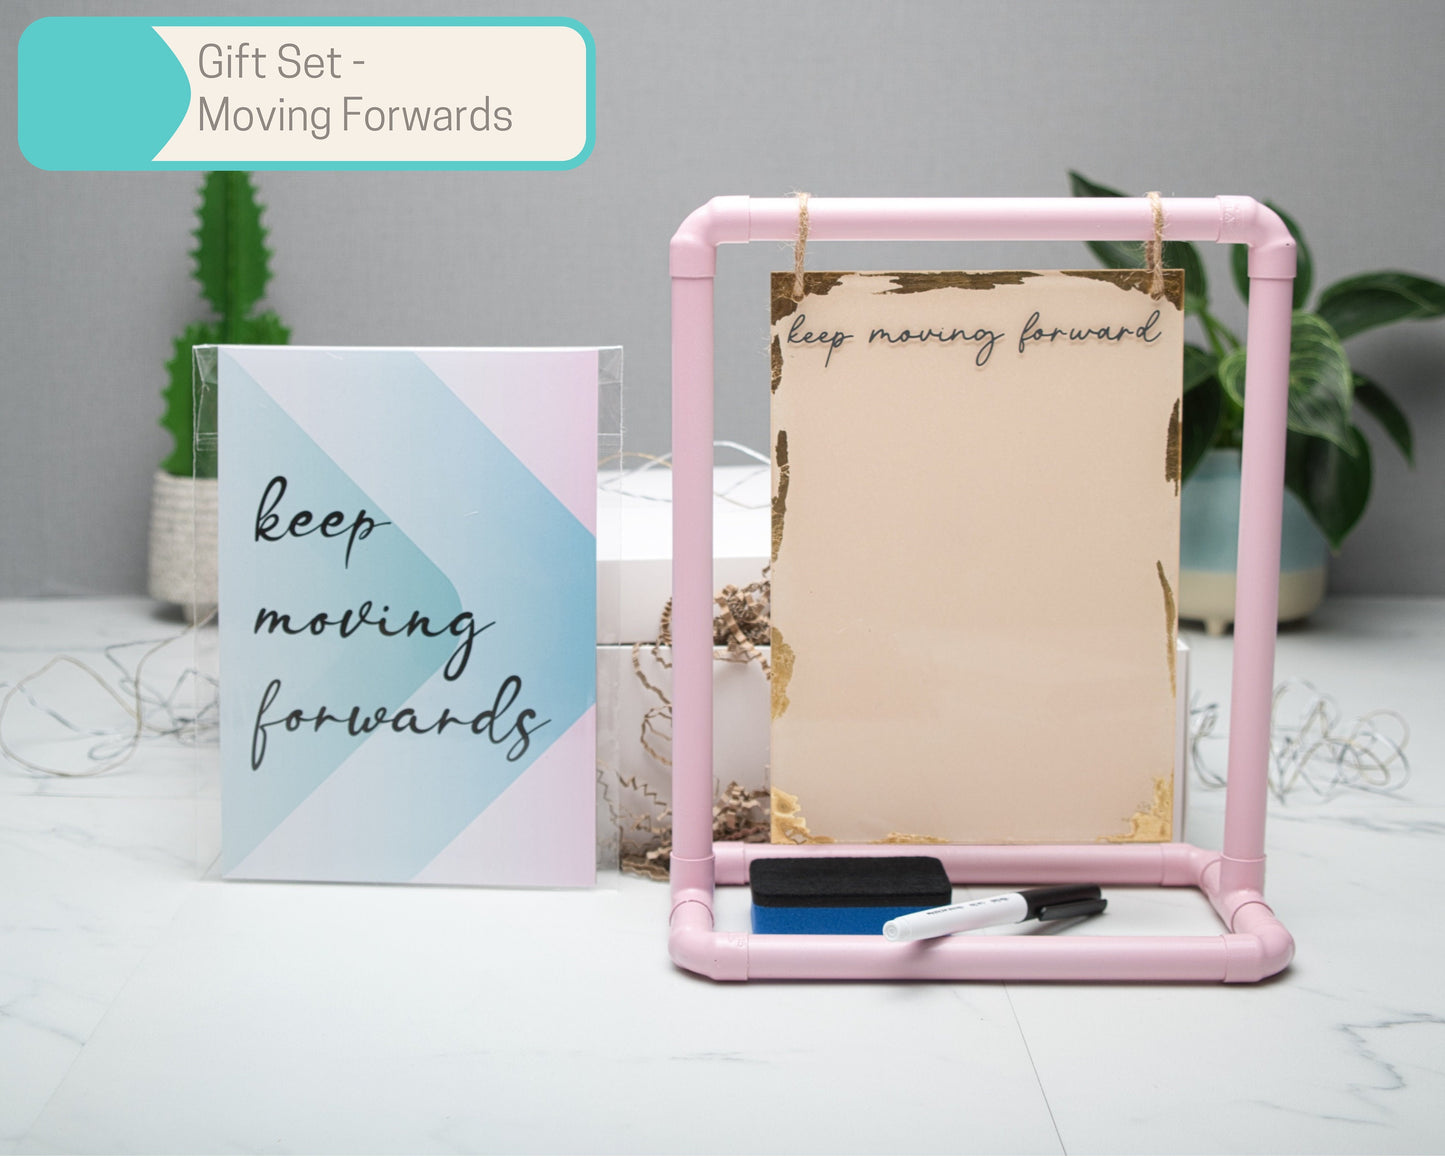 A5 Keep Moving Forward Reusable Acrylic todo List with Pink Copper Pipe Display Stand, Wall Art Gift Sets in Multiple Sizes, cozy scrunchie